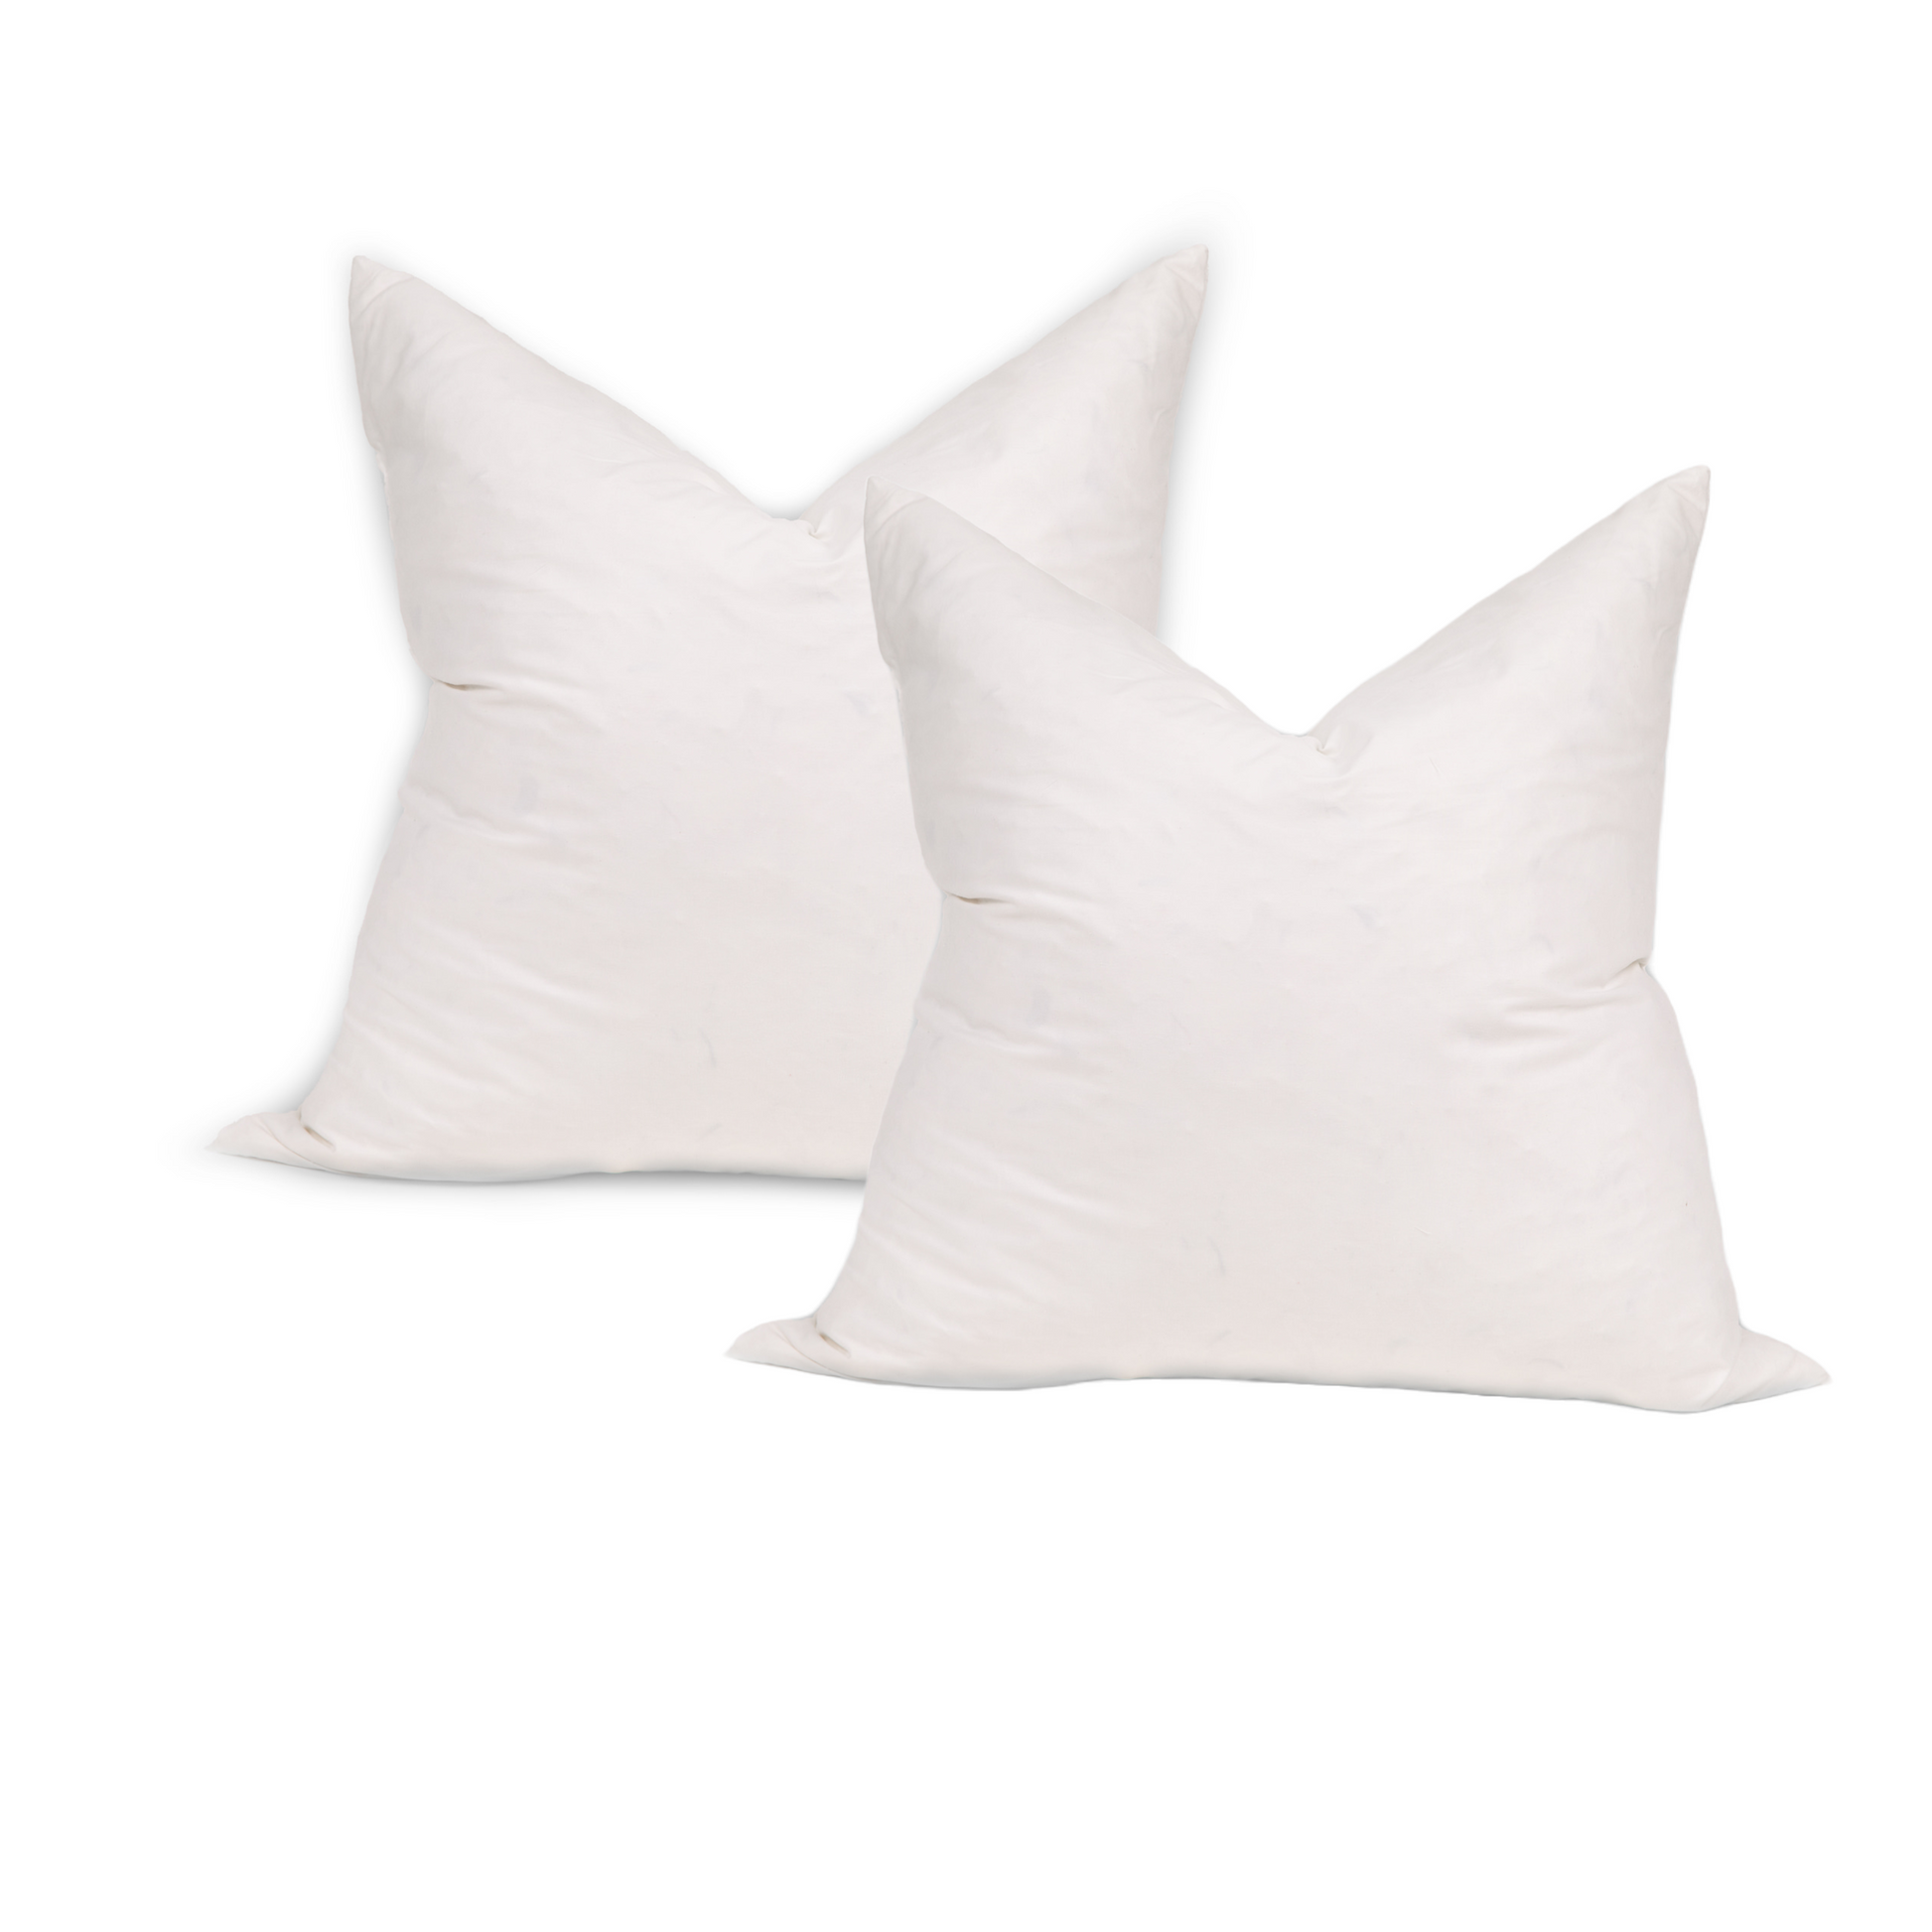 Down & Feather 18x18 - Pillows